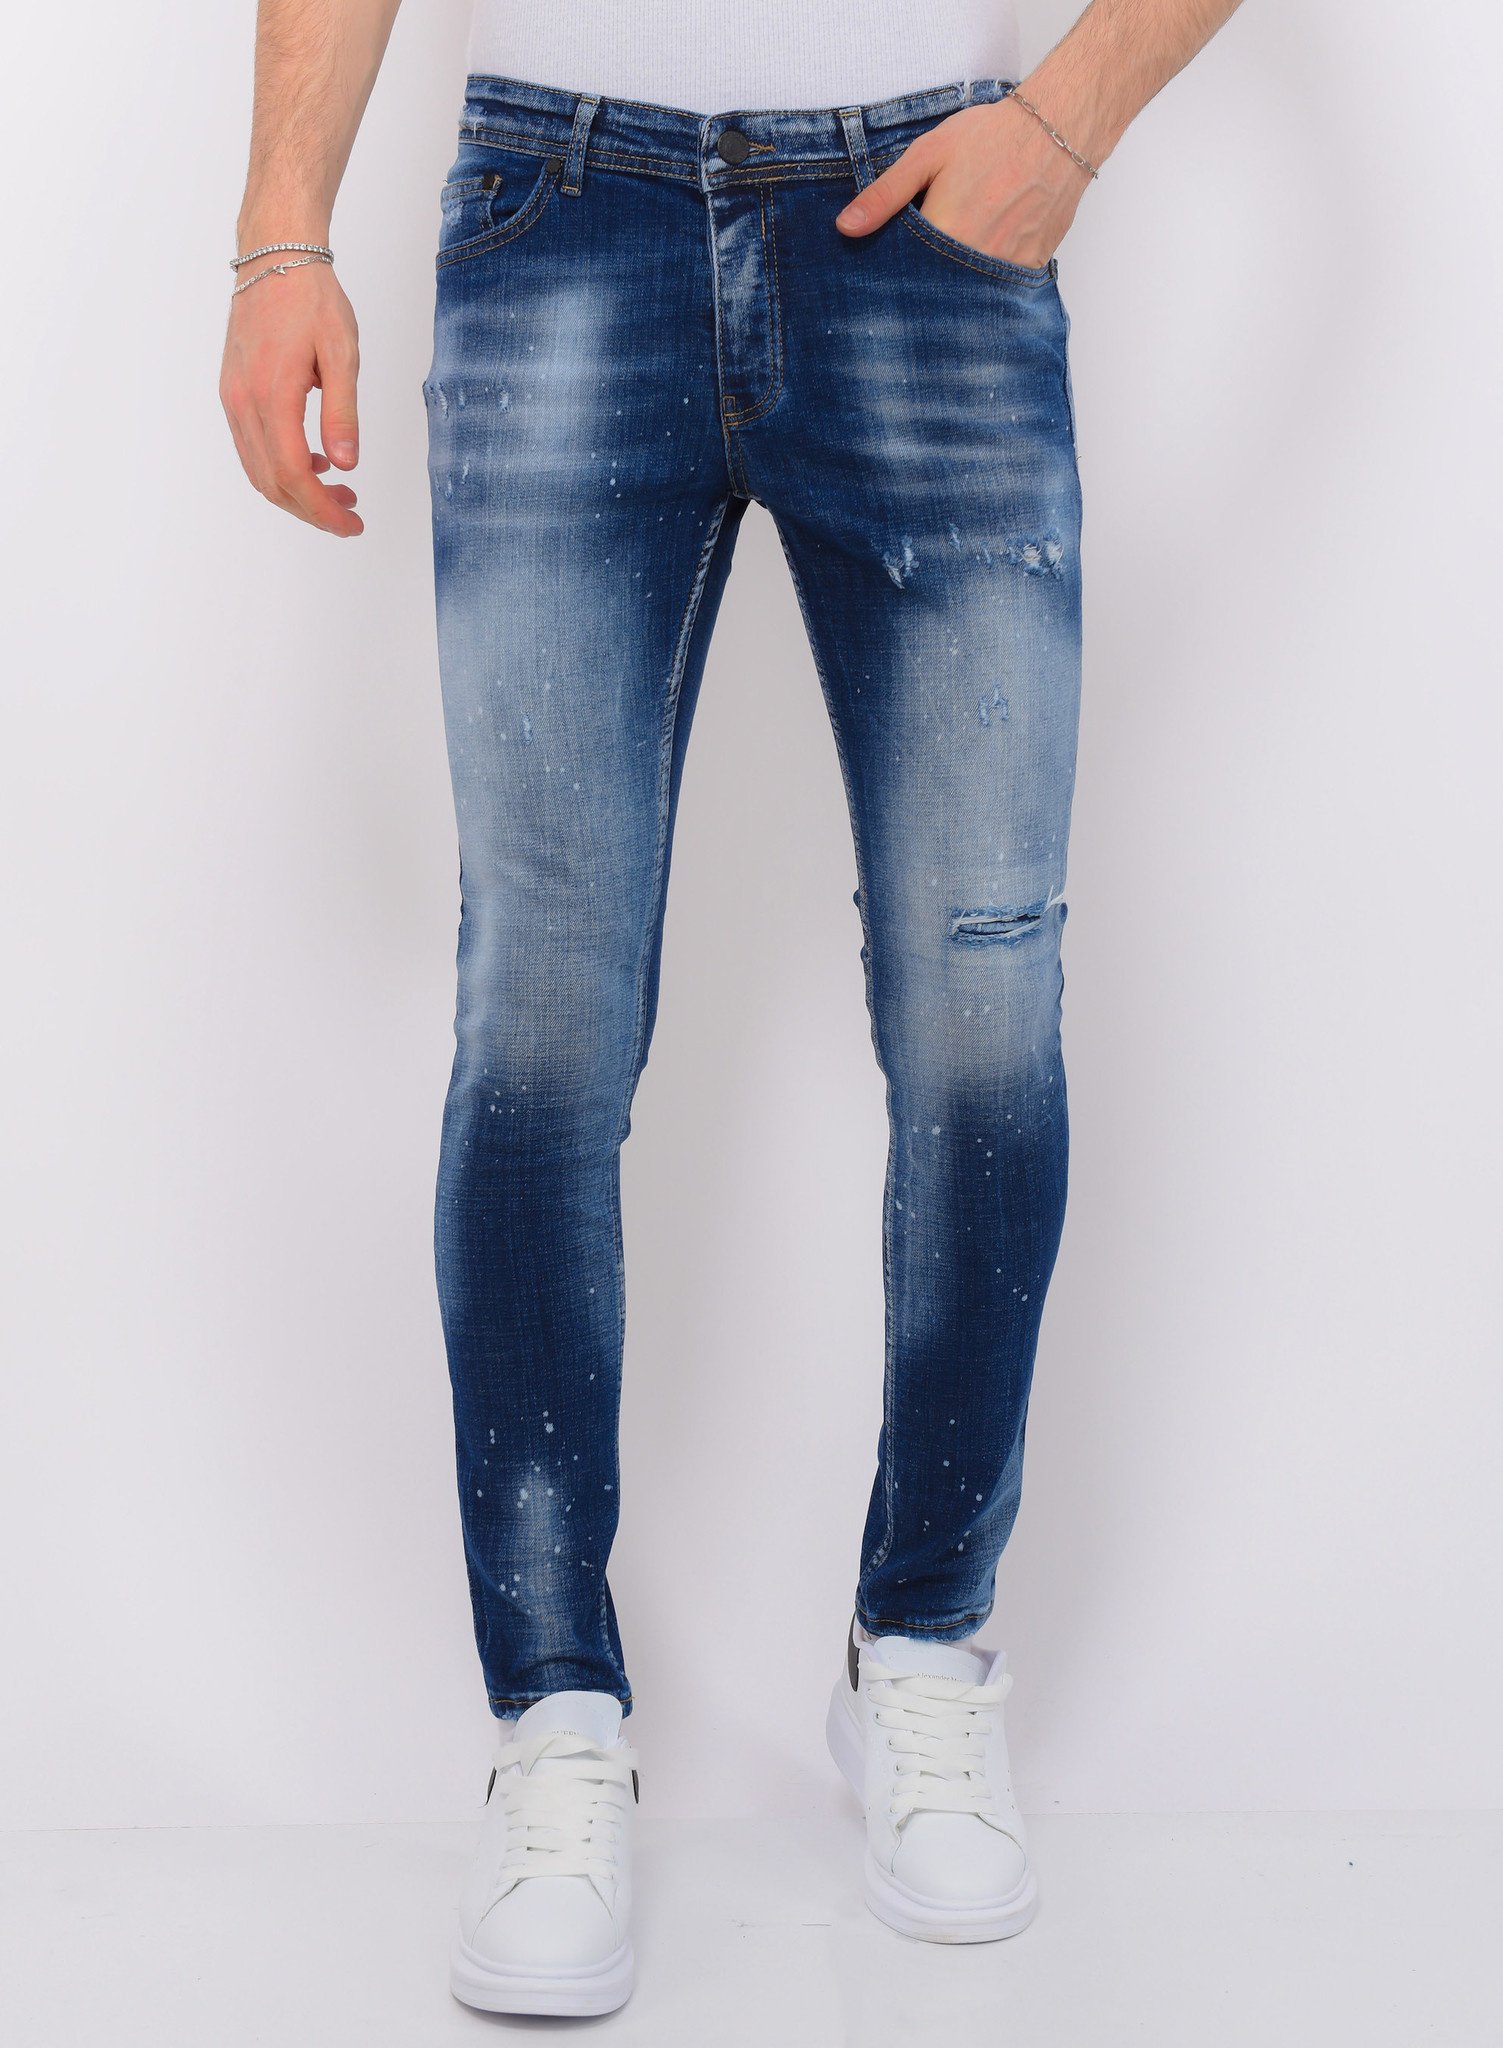 Buy A La Mode Mens Light Blue Stone Wash Jeans at Amazon.in